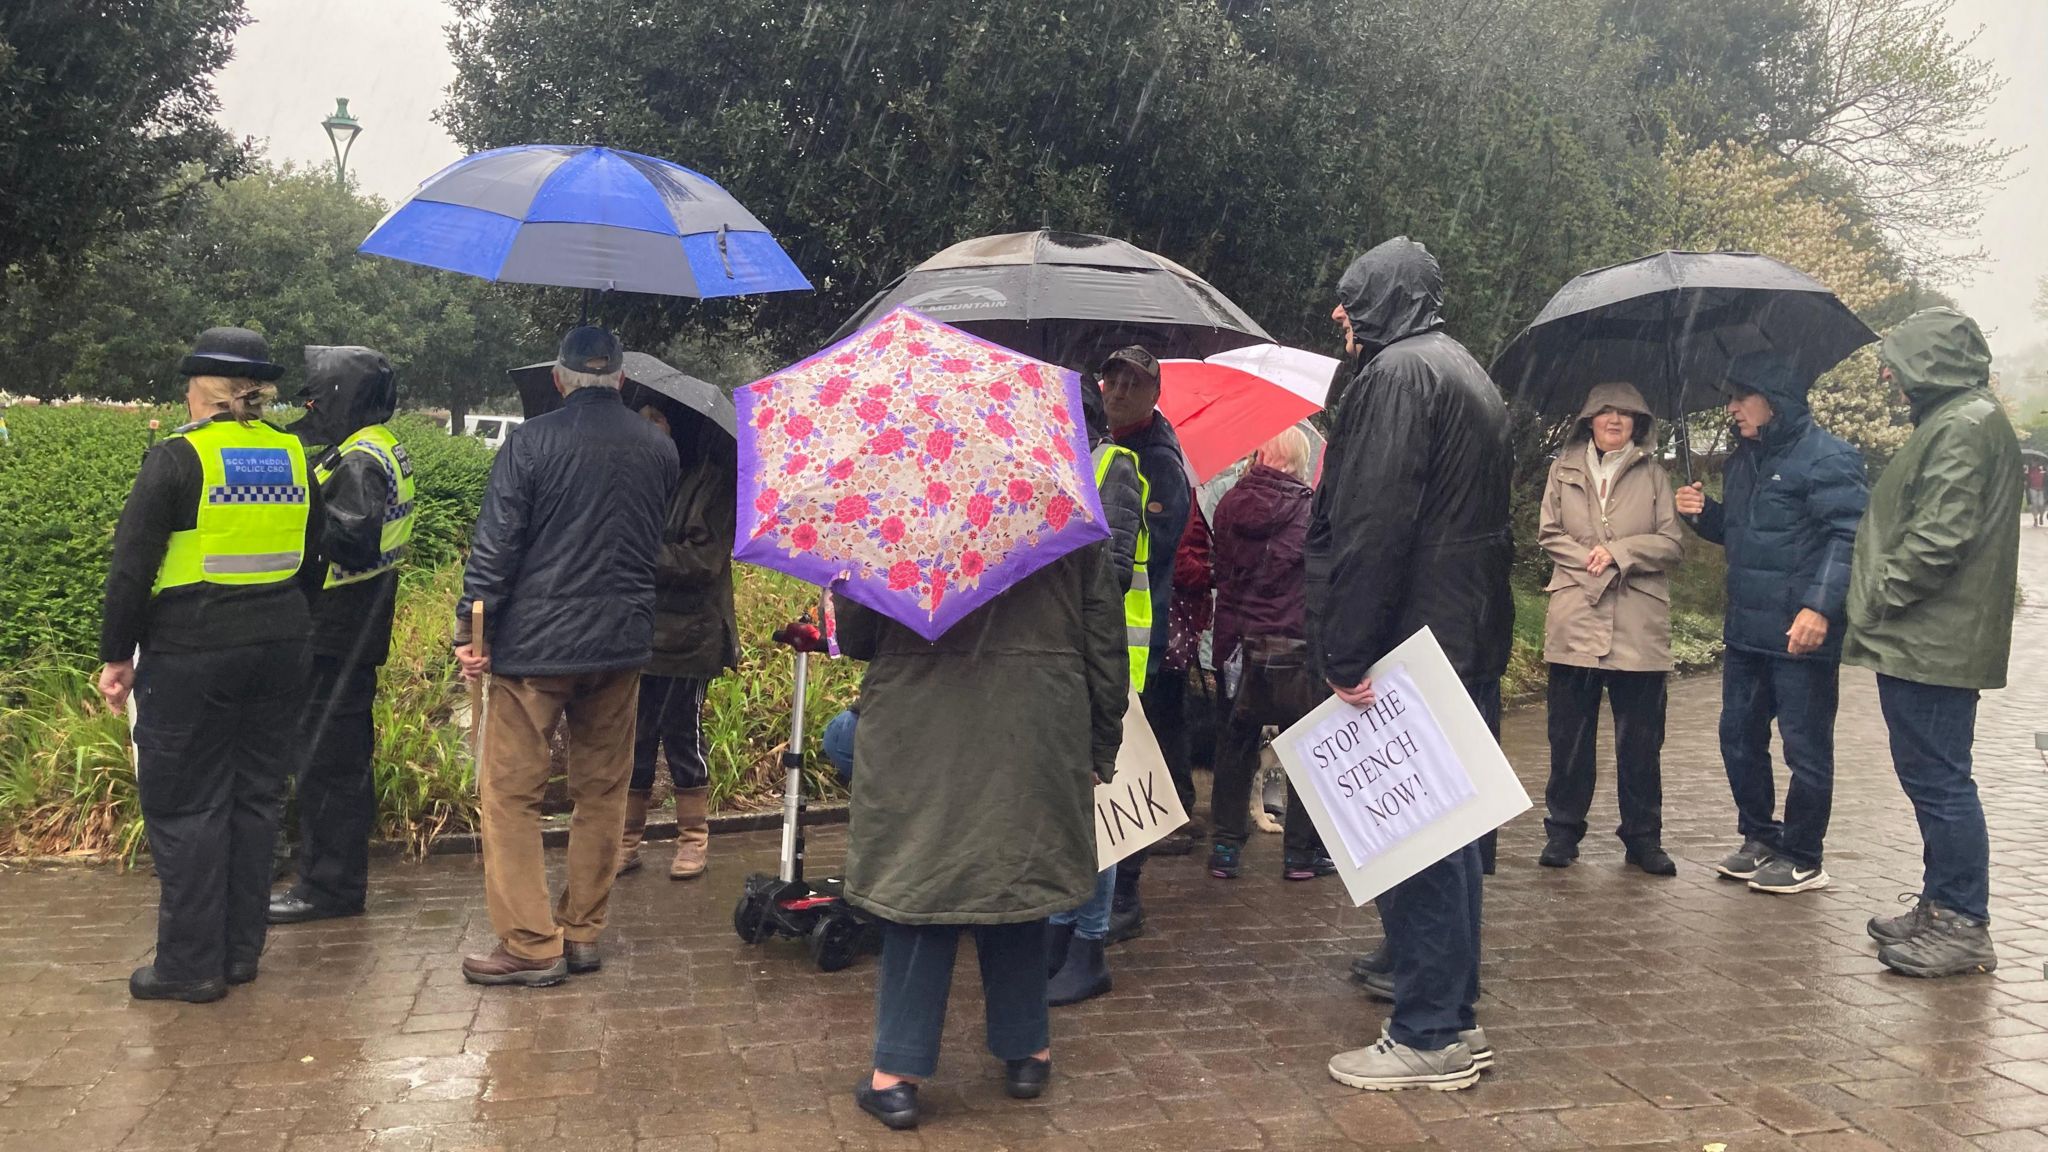 Protesters outside Pembrokeshire County Council